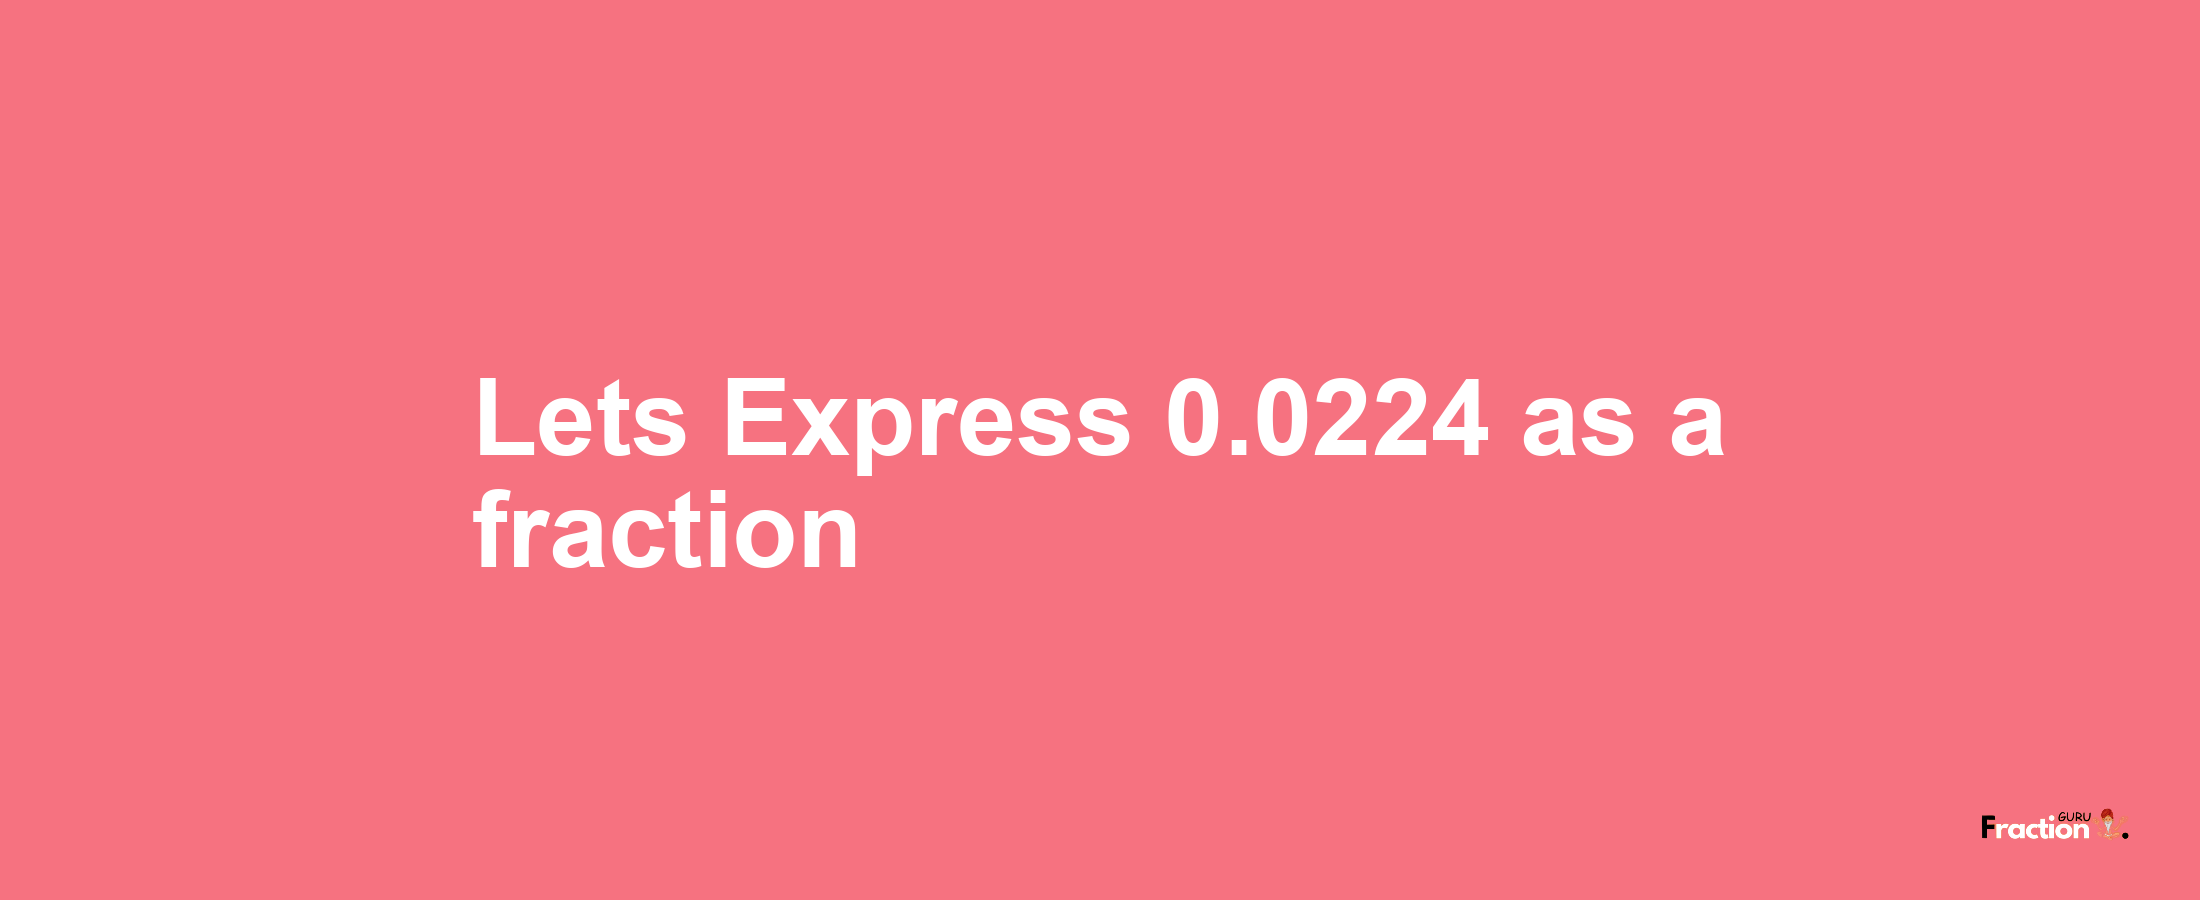 Lets Express 0.0224 as afraction